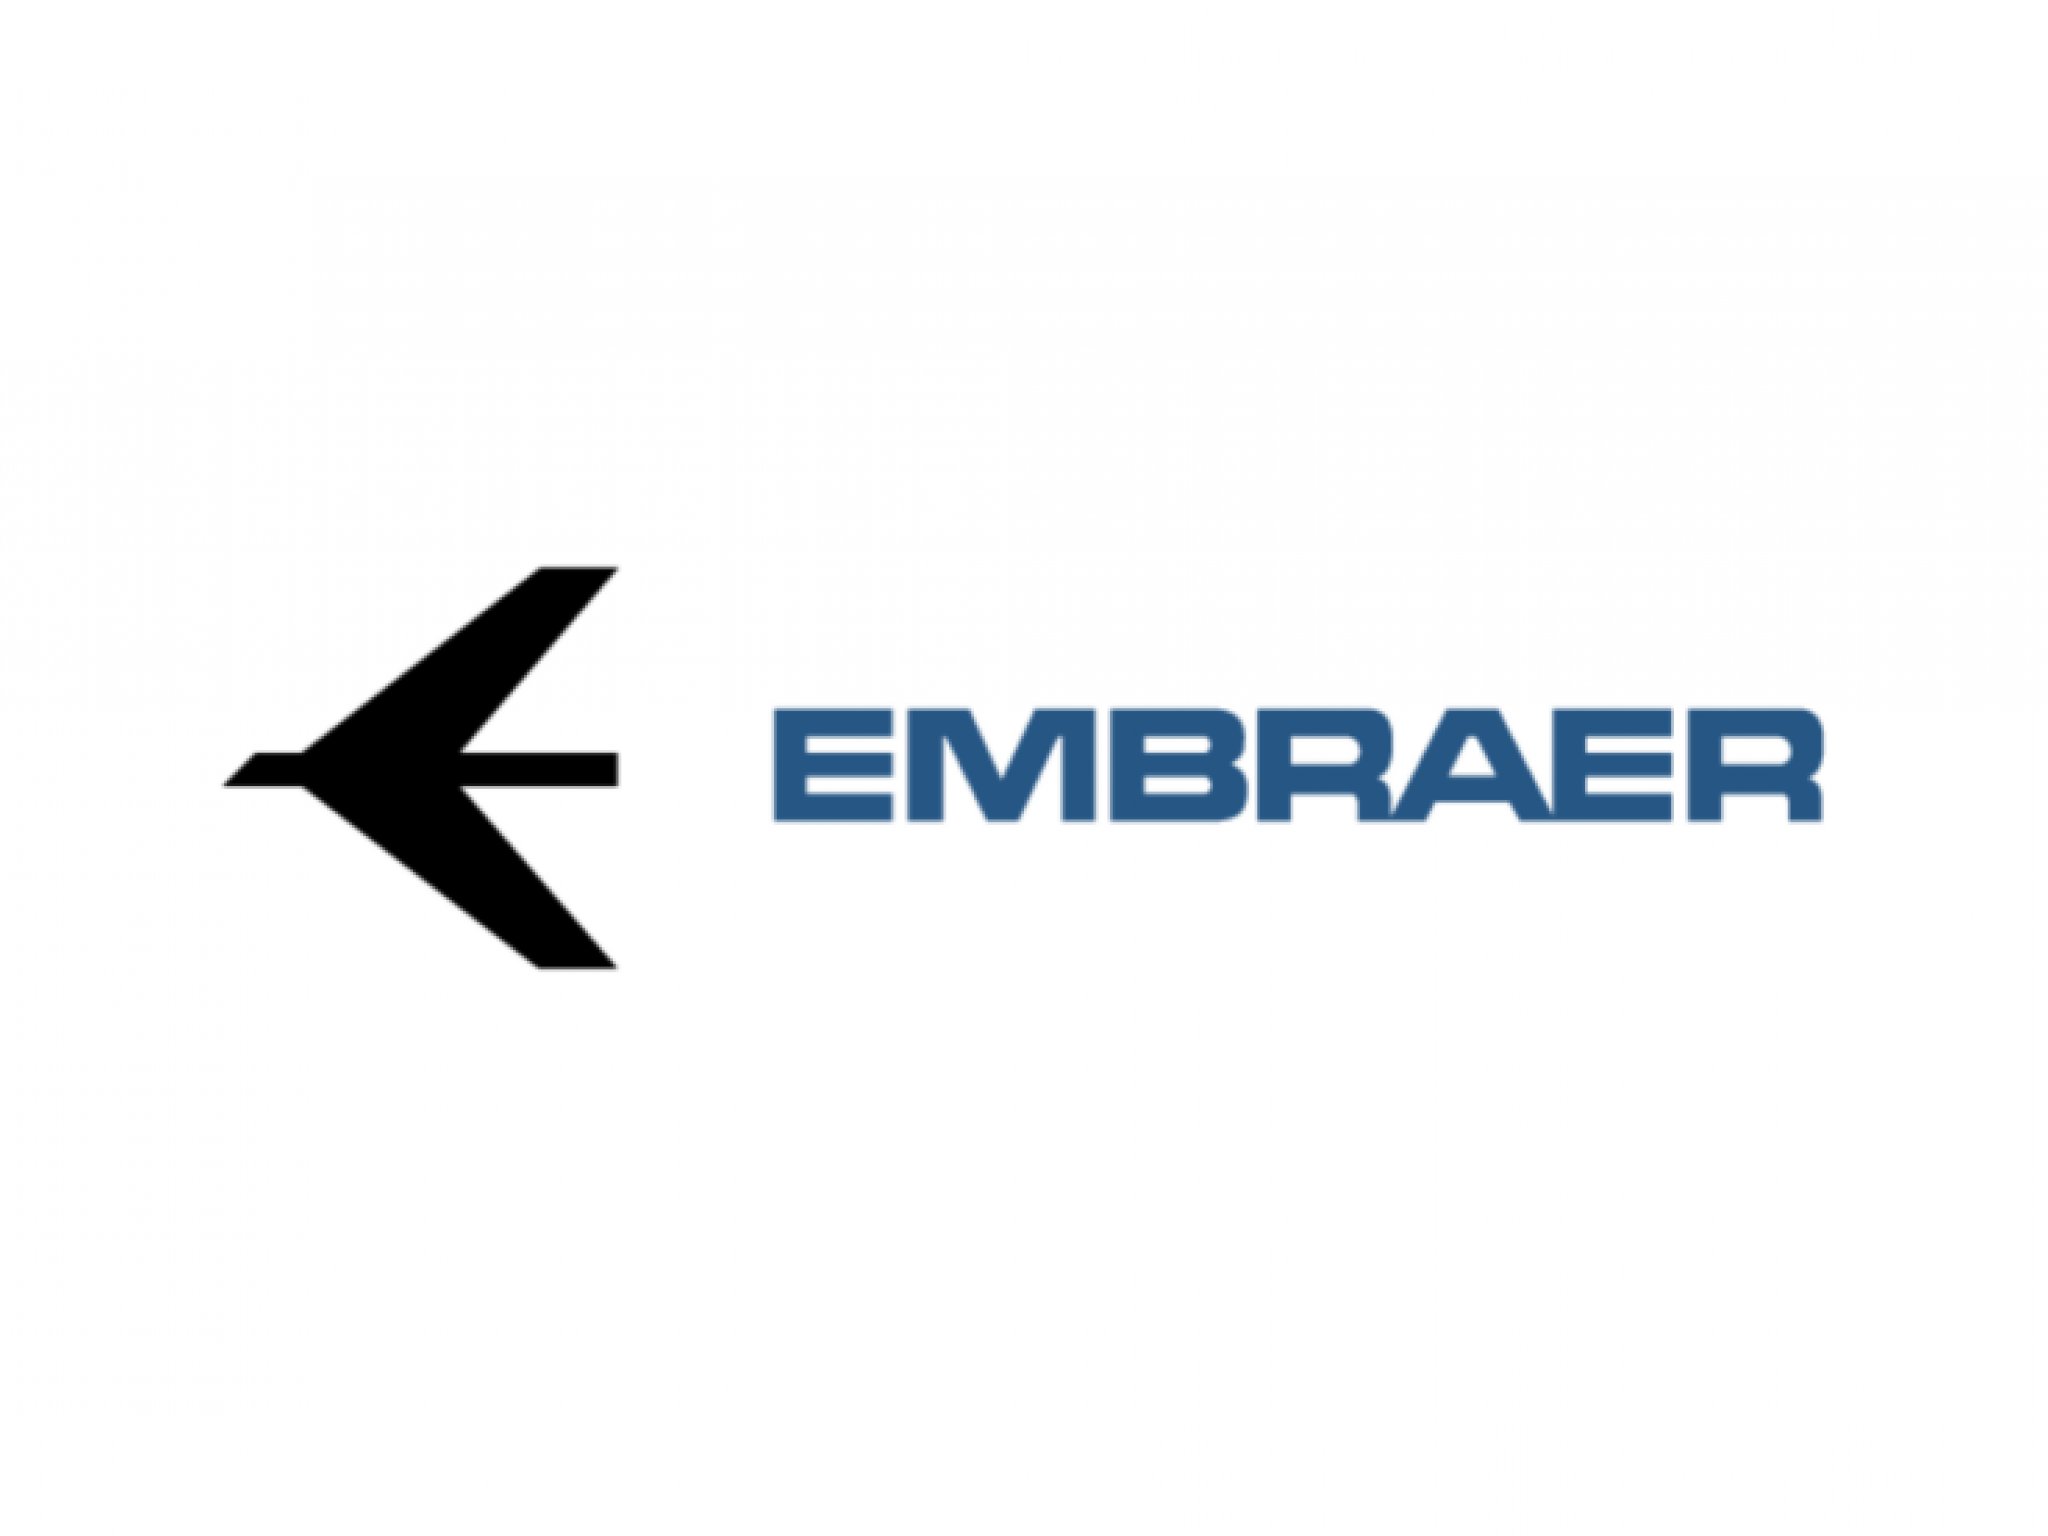  why-are-embraer-shares-trading-higher-today 